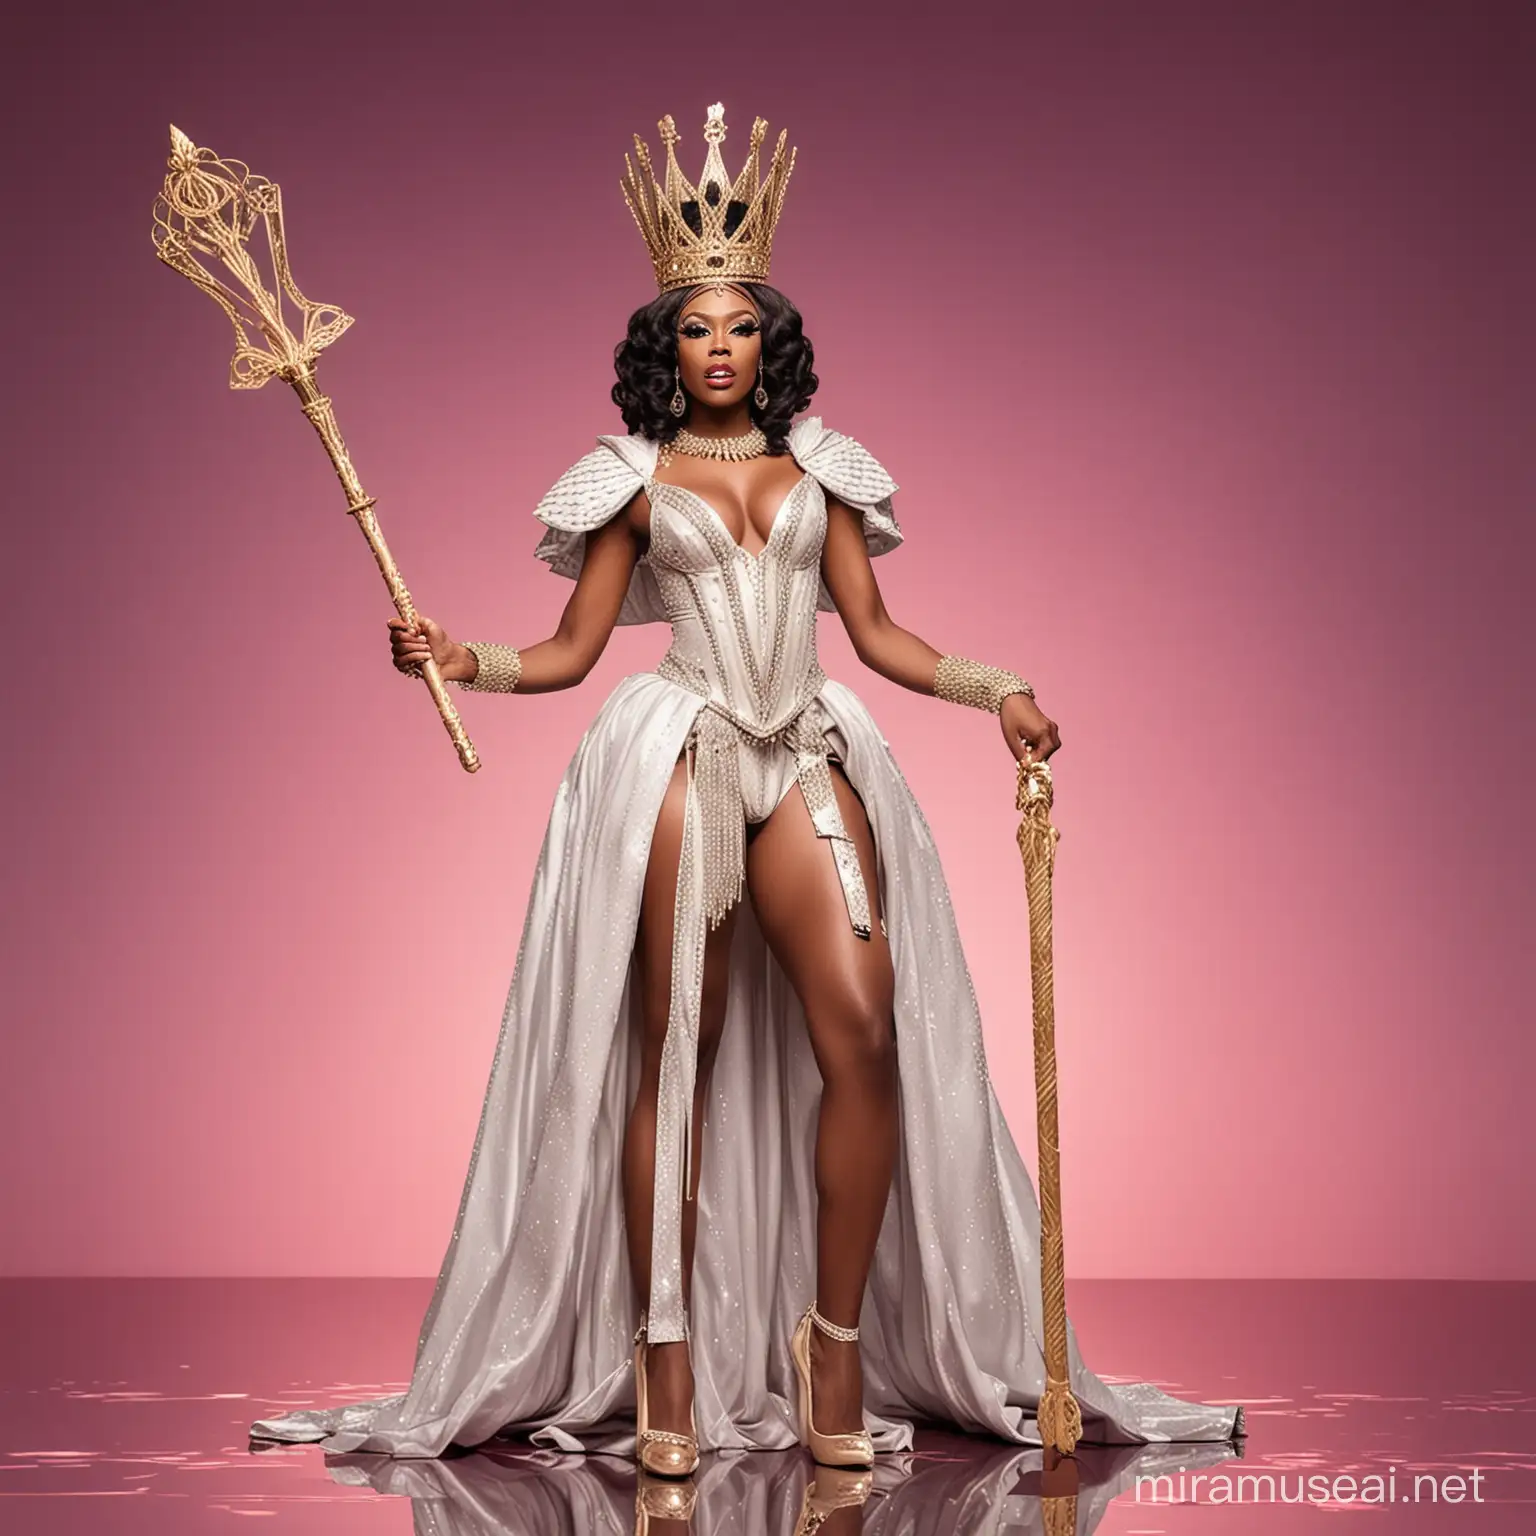 Nigerian Drag Queen on RuPauls Drag Race Runway with Scepter and Crown